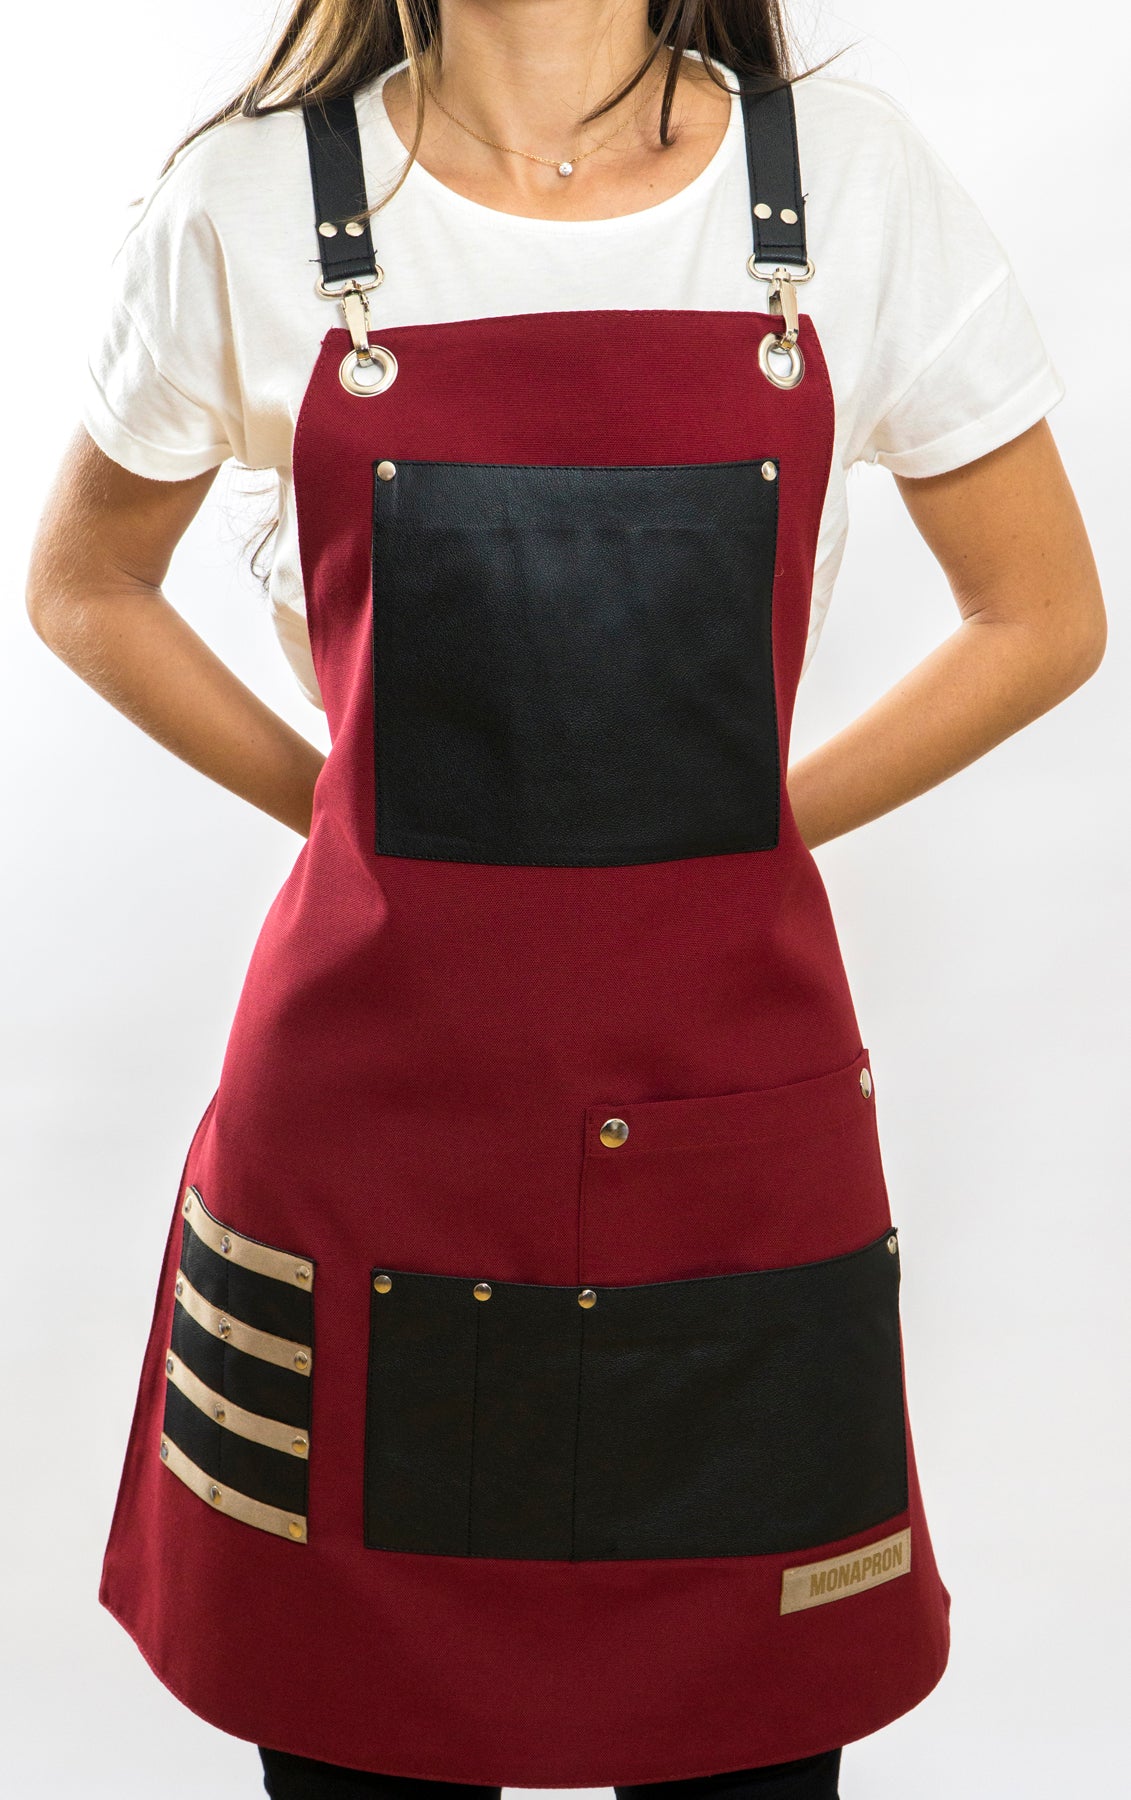 09 Titian Red Apron